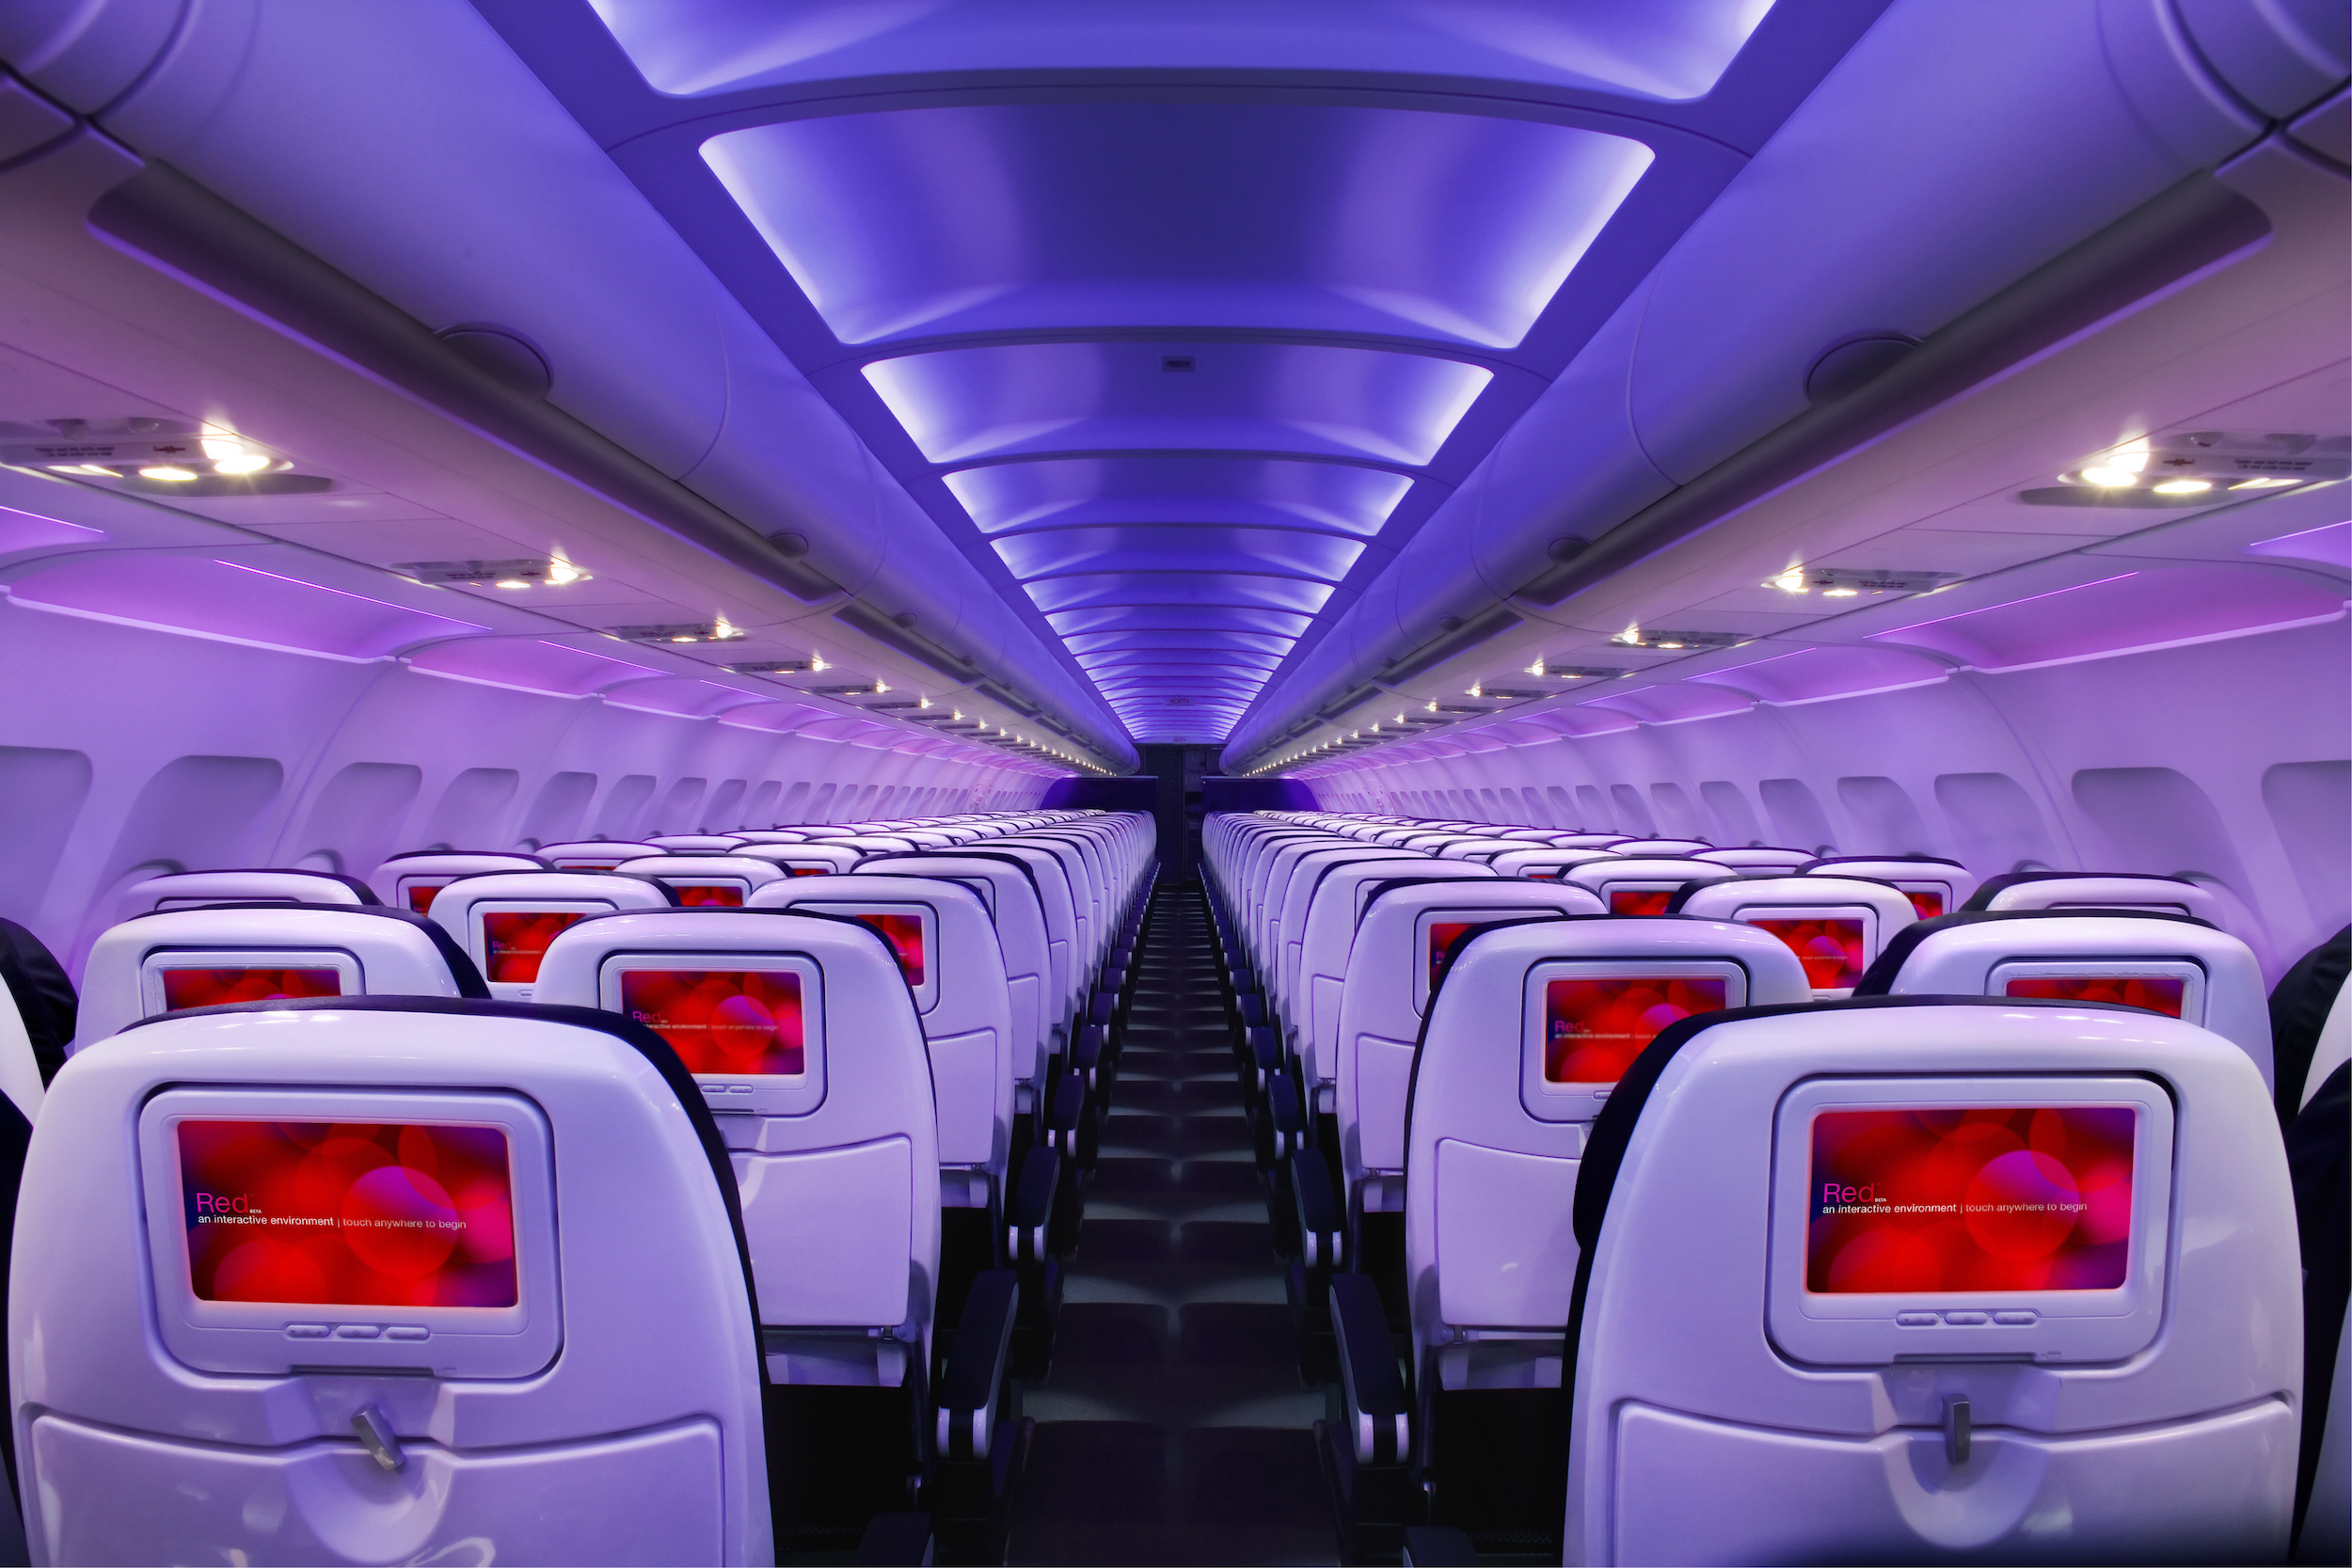 AMAZING Virgin America fare: West coast to chicago for 8,200 points RT!